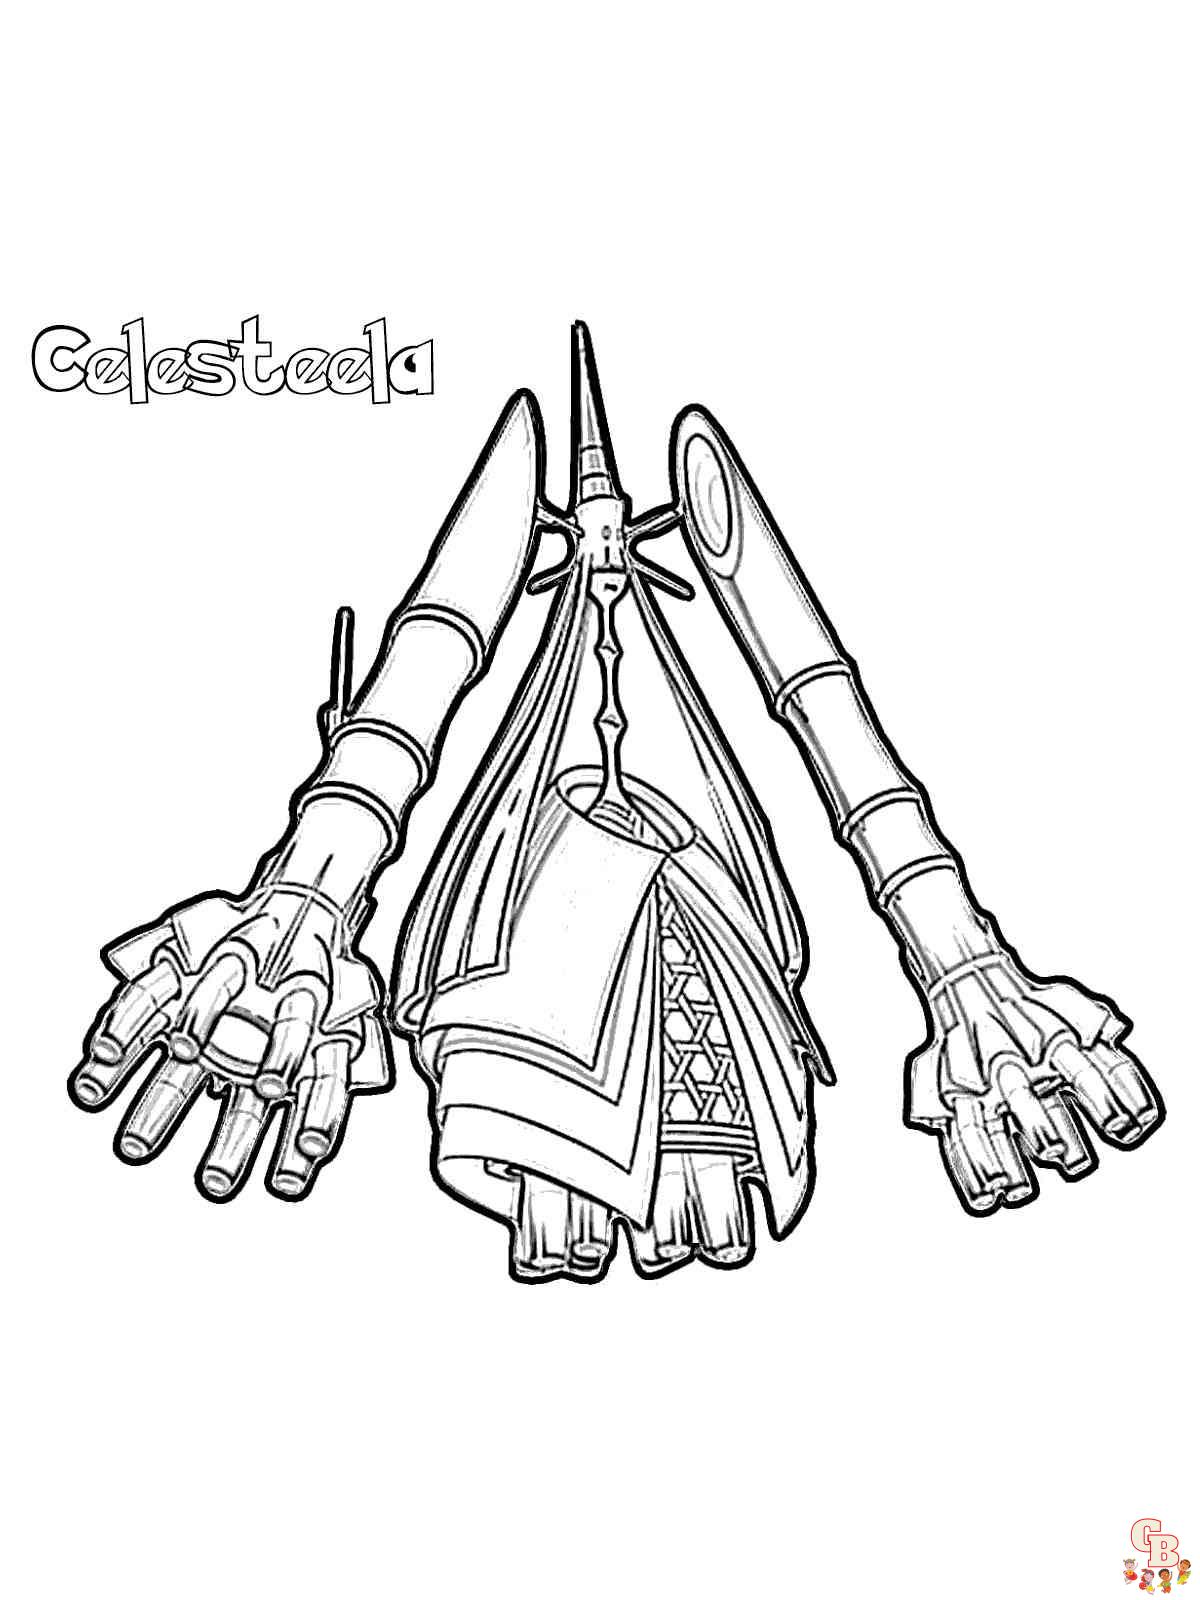 Pokemon Celesteela coloring pages free